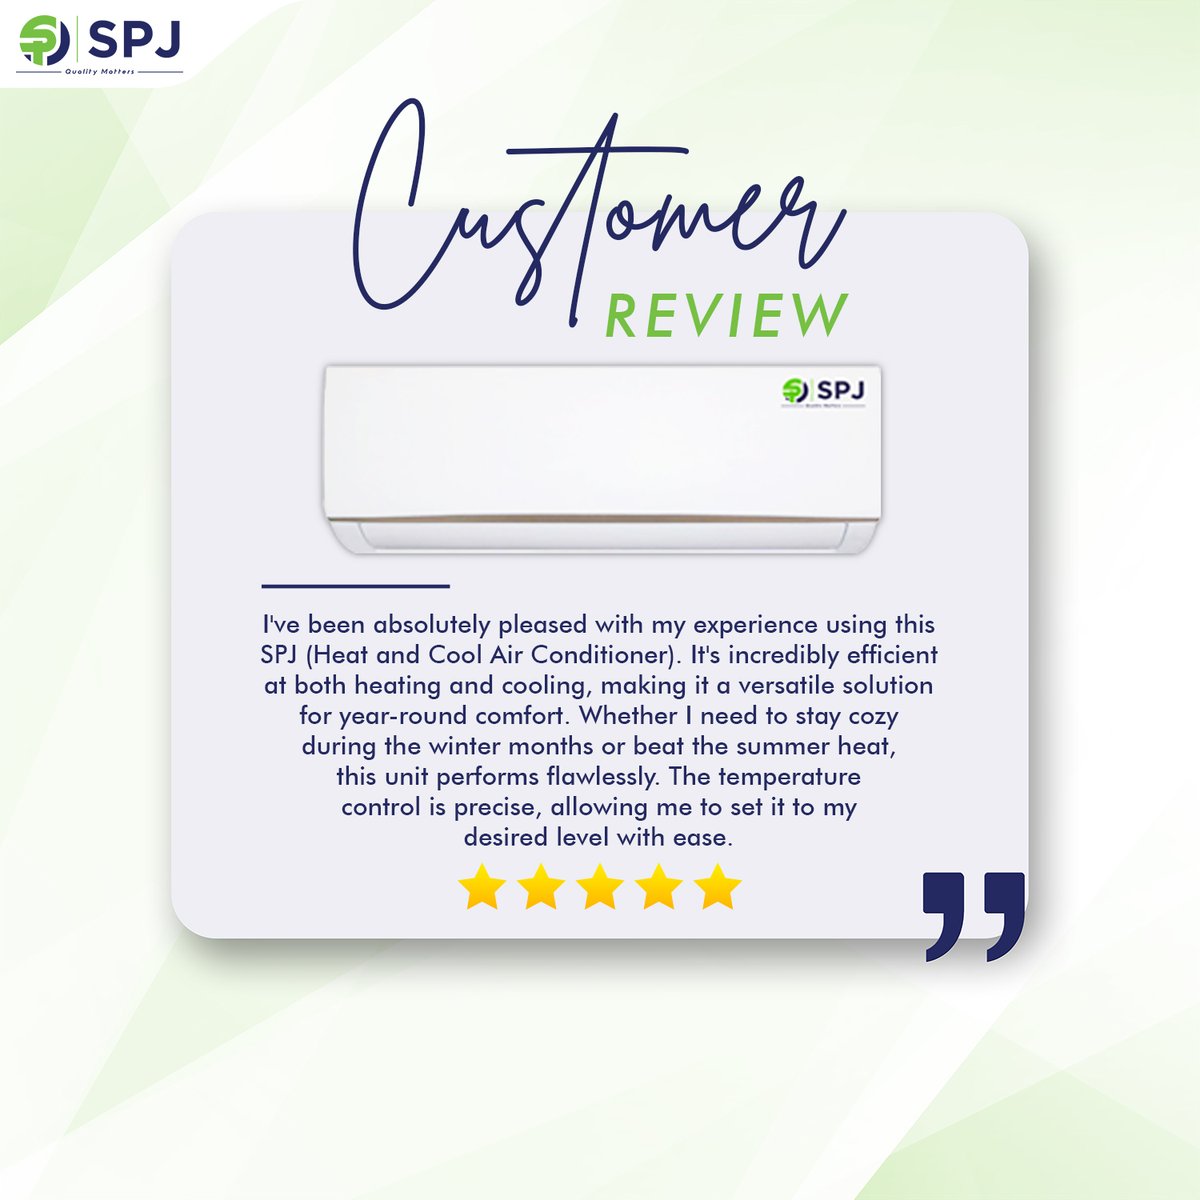 Appreciating Customers Insights. Thanks for Choosing SPJ Air conditioner.
.
.
.
#spj #spjelectronics #electronics #RIPMphoSebeng #PerfectMatchXtra #TheUltimatumSA #Asidlali #ByebyeMPC